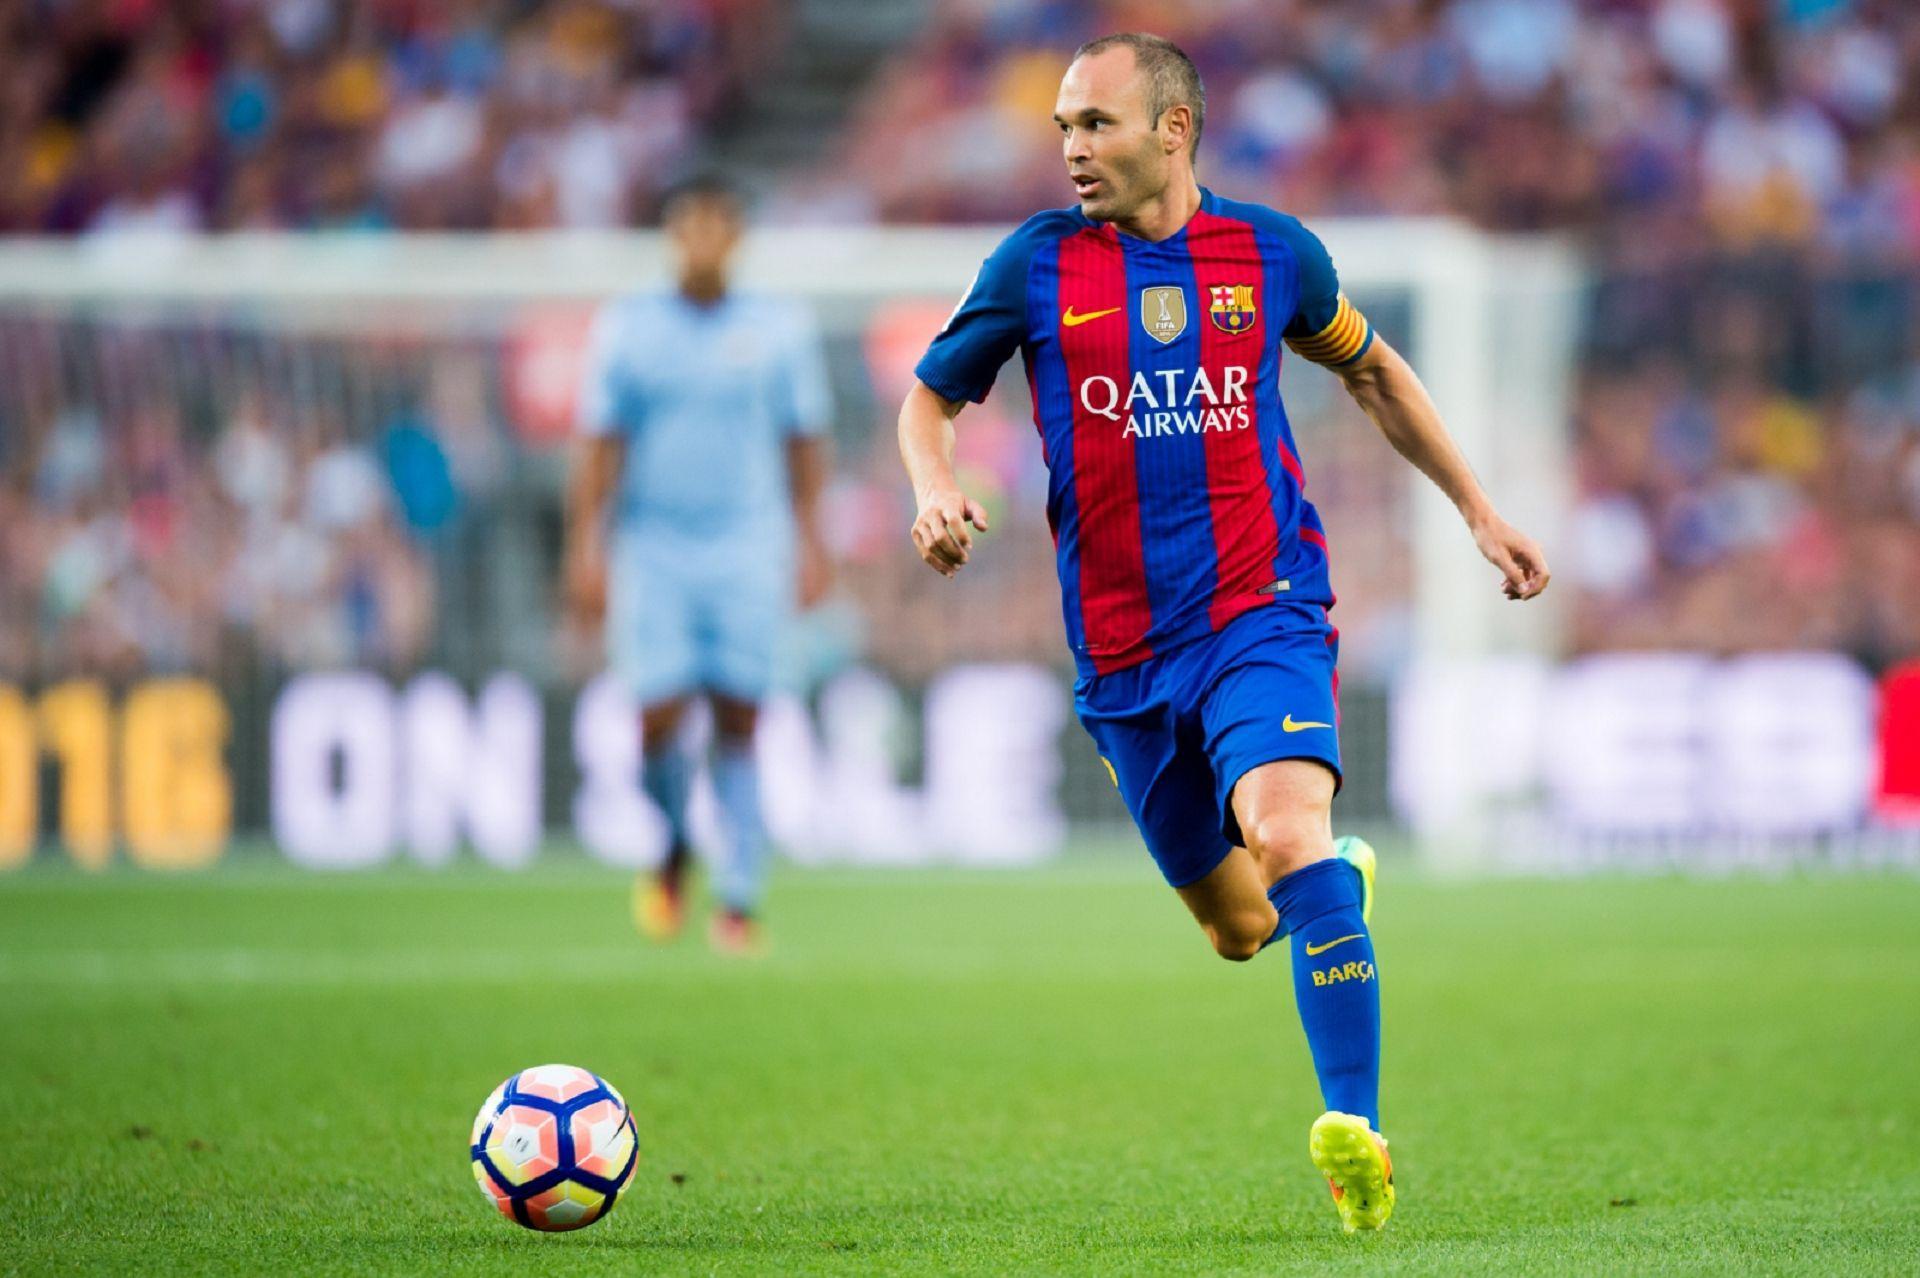 Andres Iniesta Wallpaper Image Photo Picture Background